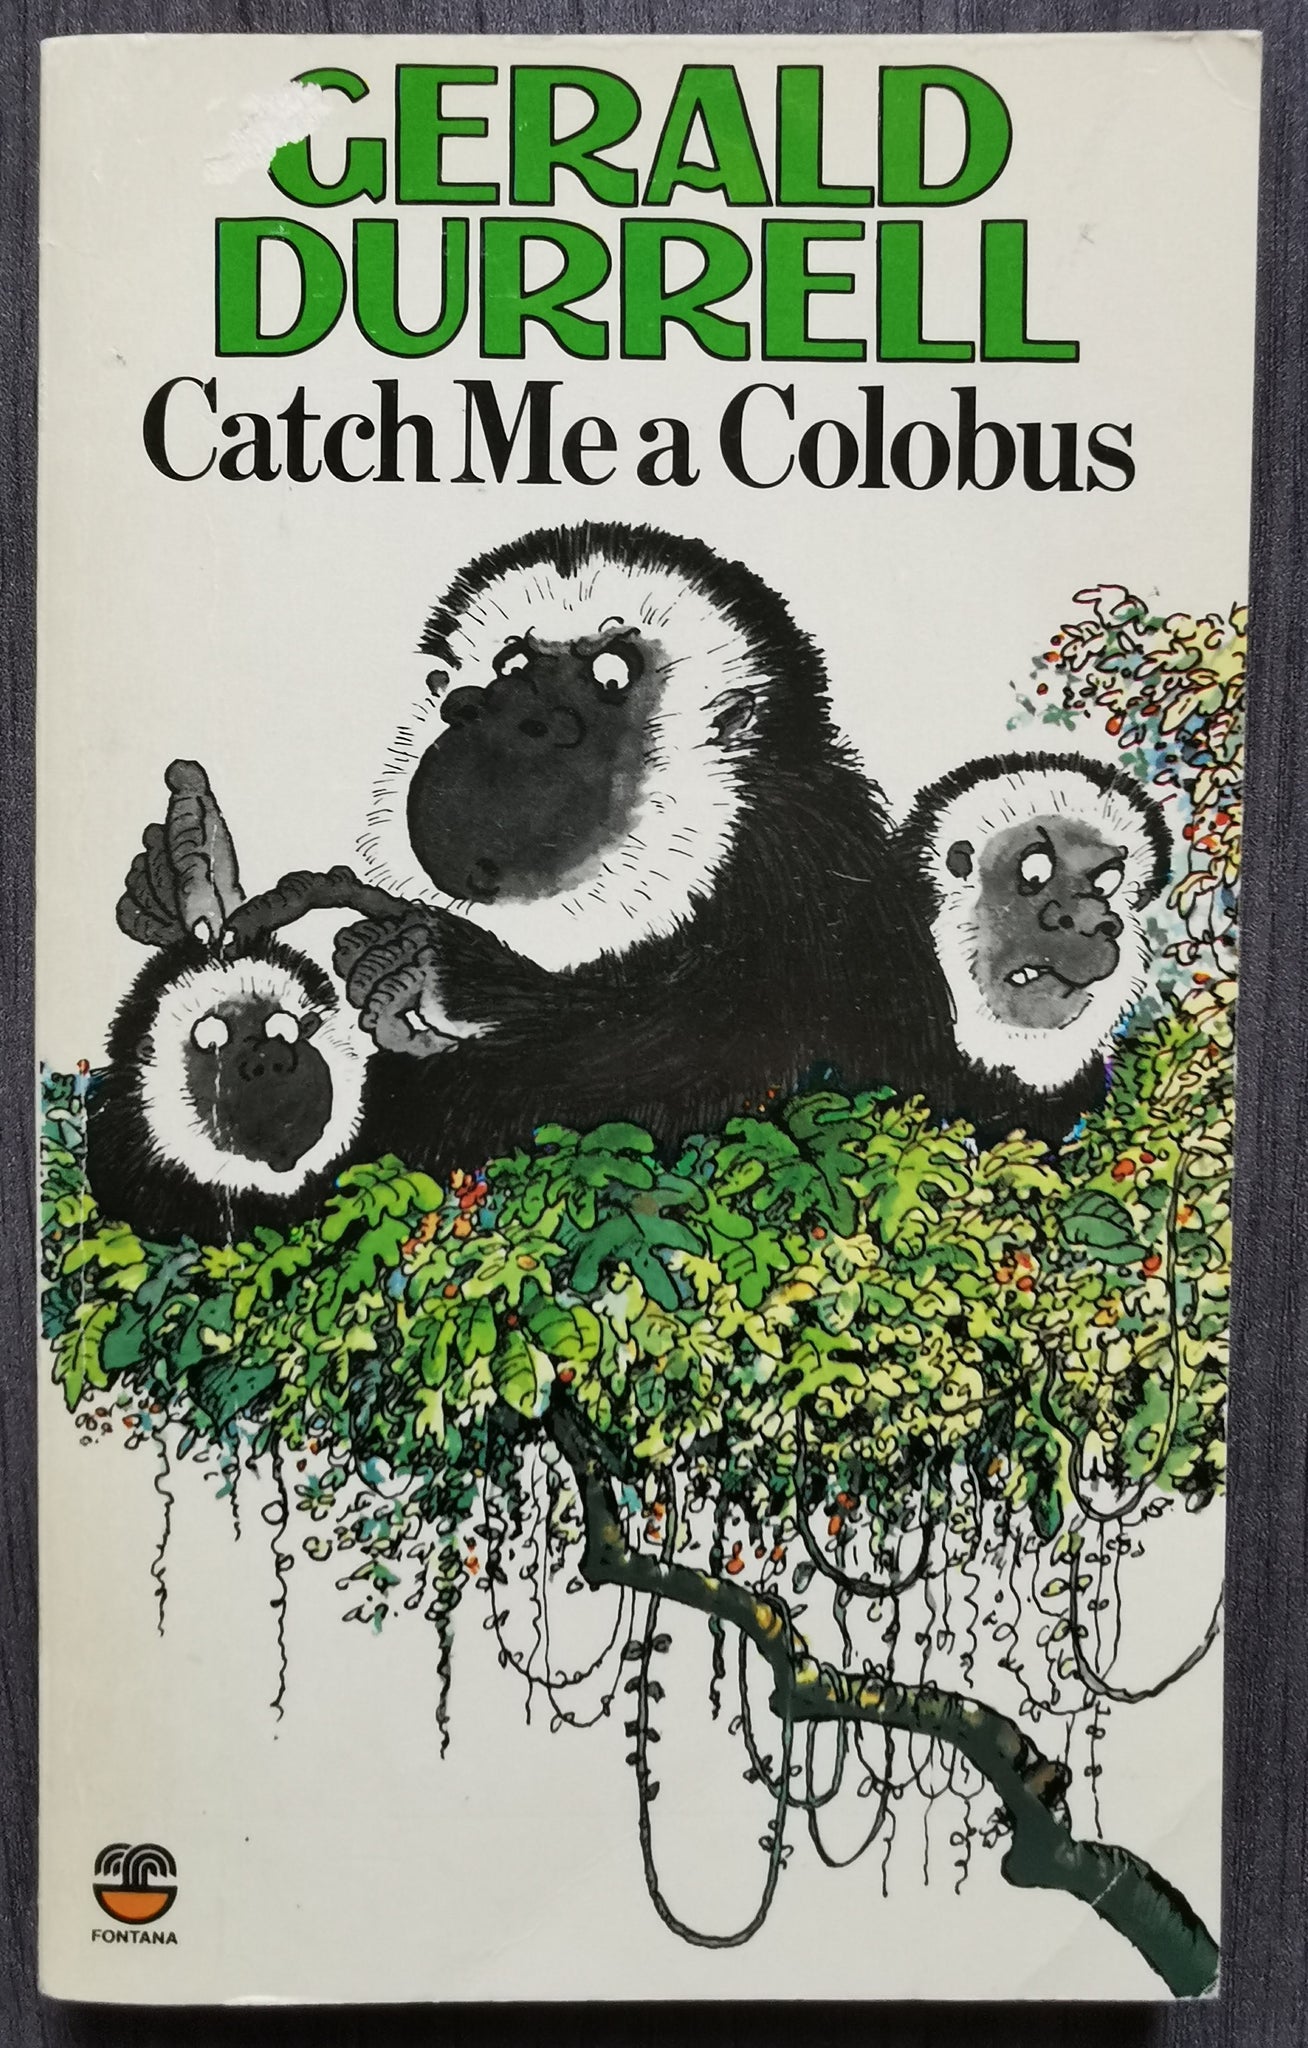 Catch me a Colobus by Gerald Durrell